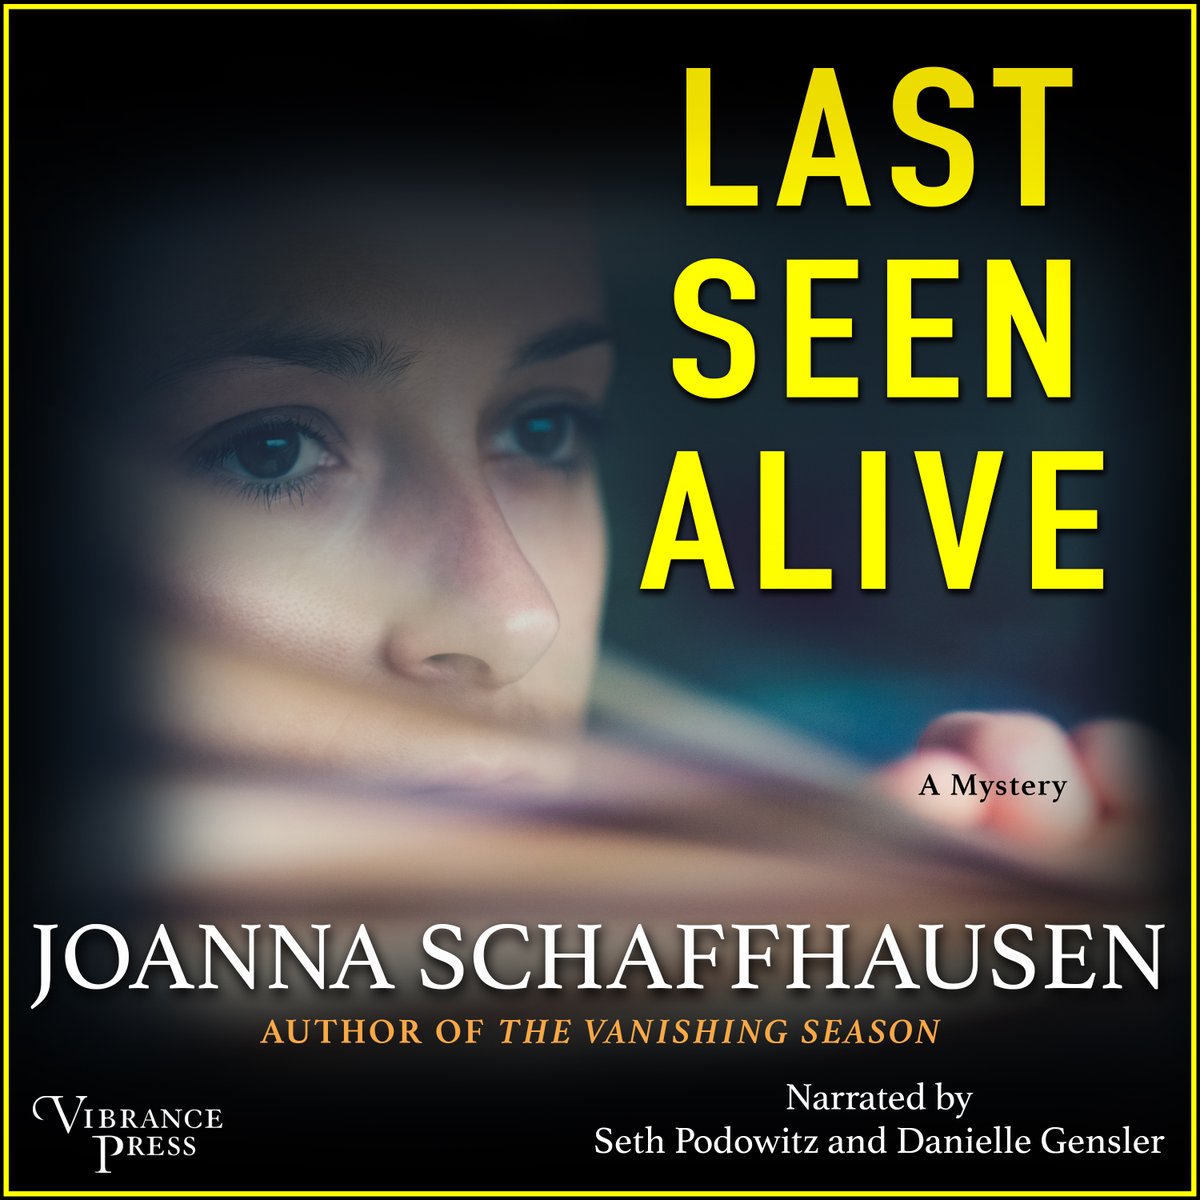 FBI agent Reed Markham saved Ellery from a serial killer’s closet. Now the killer will divulge where the bodies are. On one condition: Reed must bring him Ellery

LAST SEEN ALIVE by Joanna Schaffhausen narrated by @audiobookseth and @GenslerDanielle 

Now in audio from Vibrance